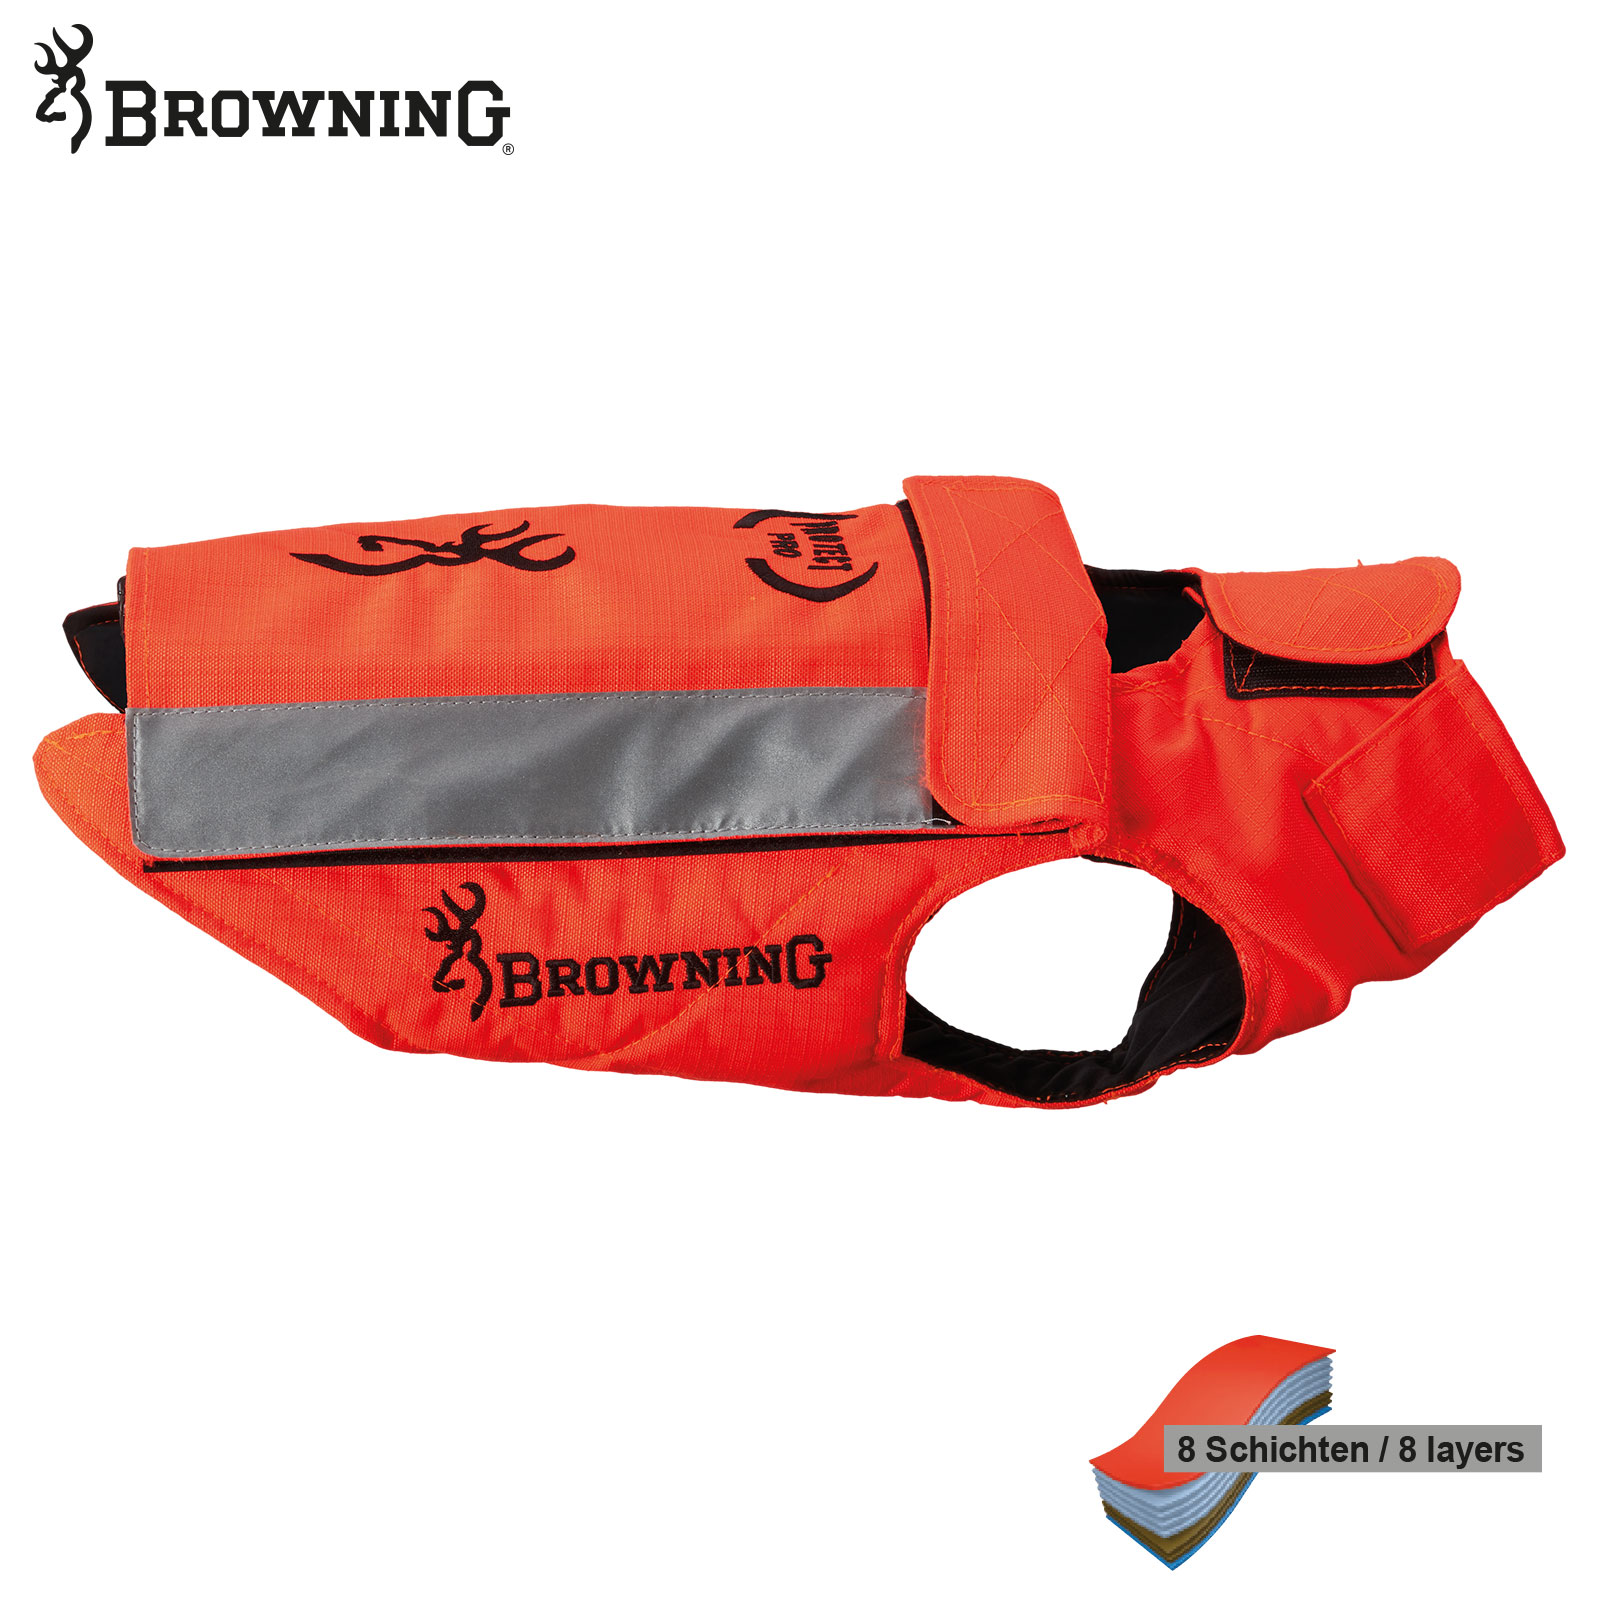 BROWNING Hundeschutzweste Protect Pro von Browning